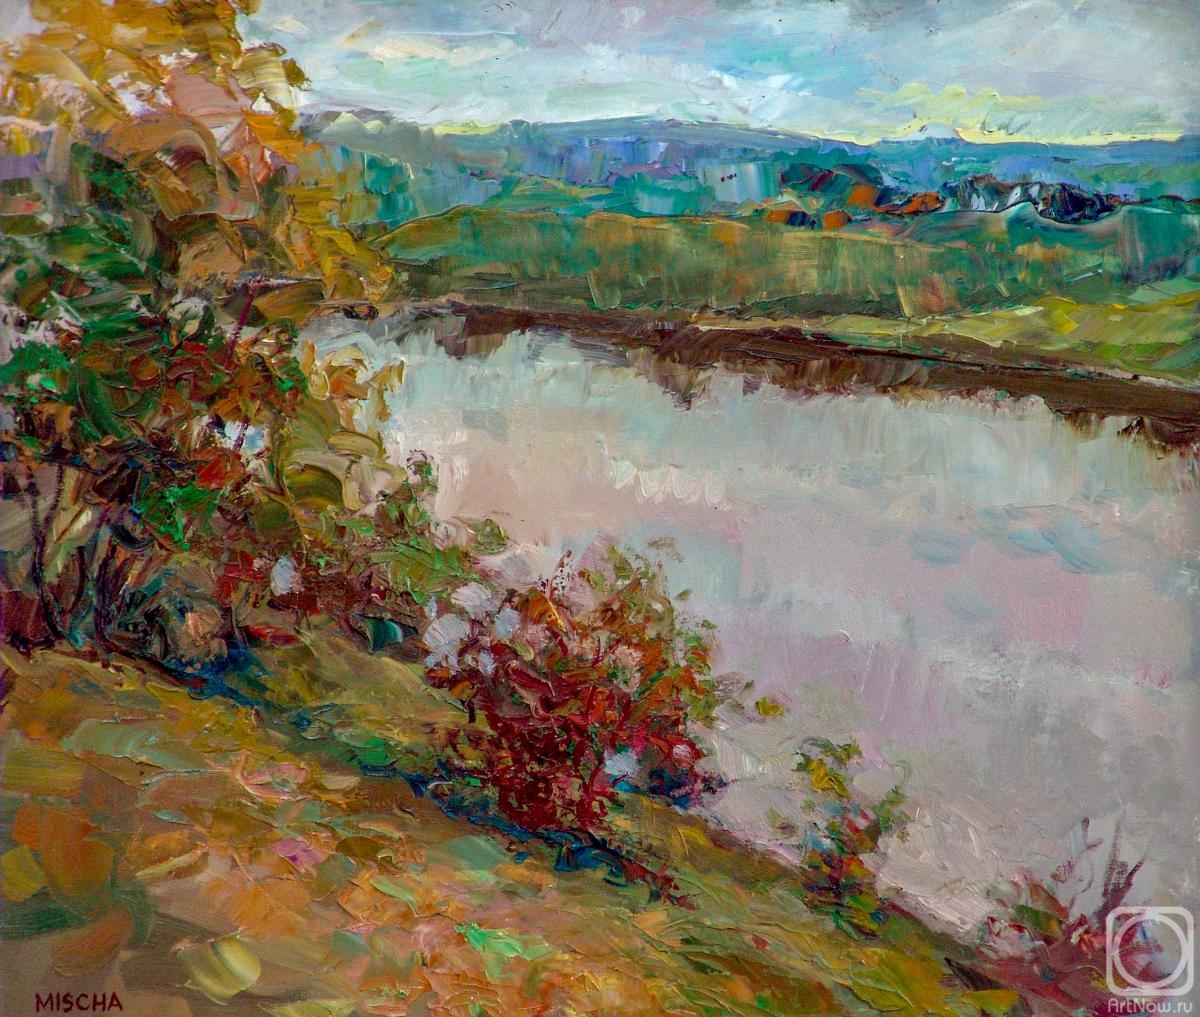 Grigoryan Mike. Autumn. The old course of the Volga river